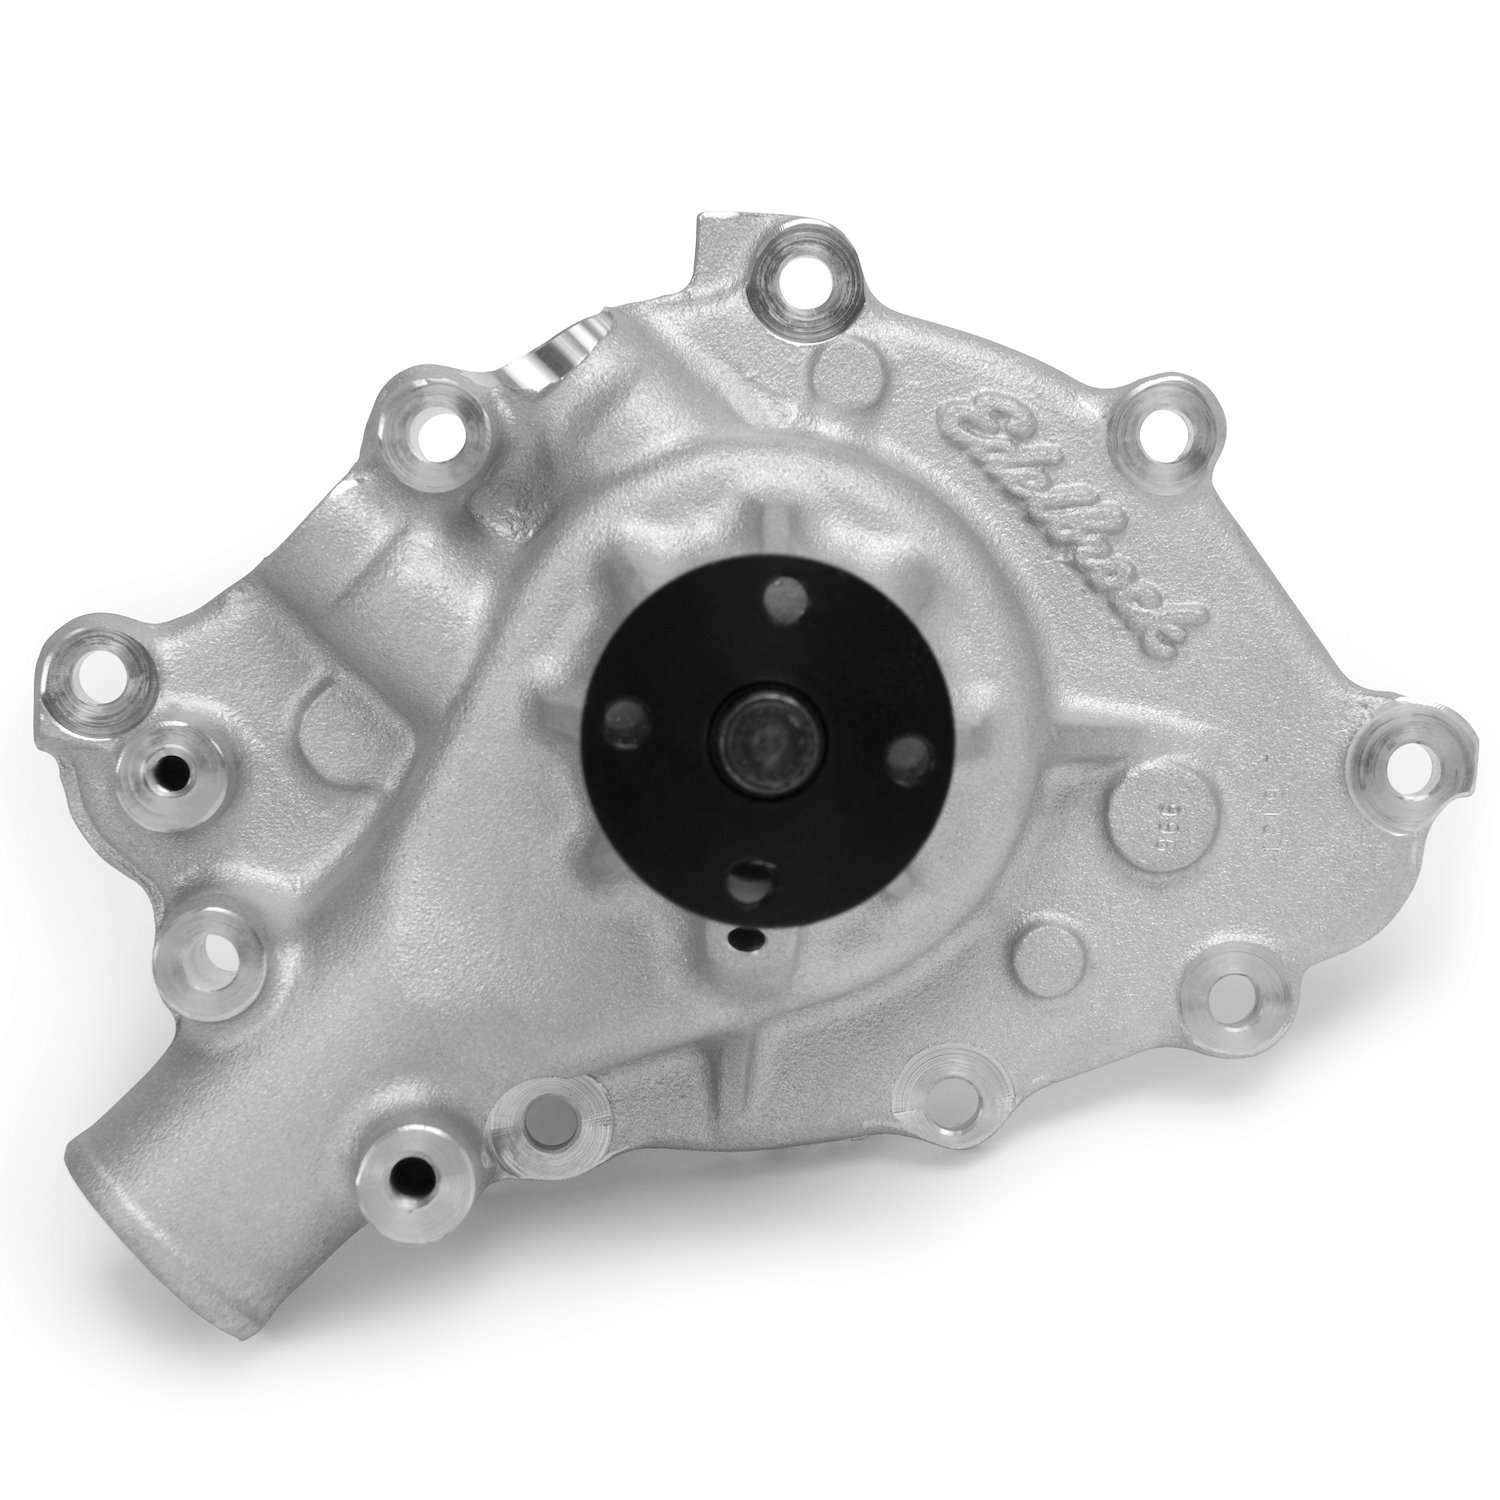 Victor Series Satin Aluminum Water Pump for 1965-1976 Small Block Ford 289 "K" Code Engine